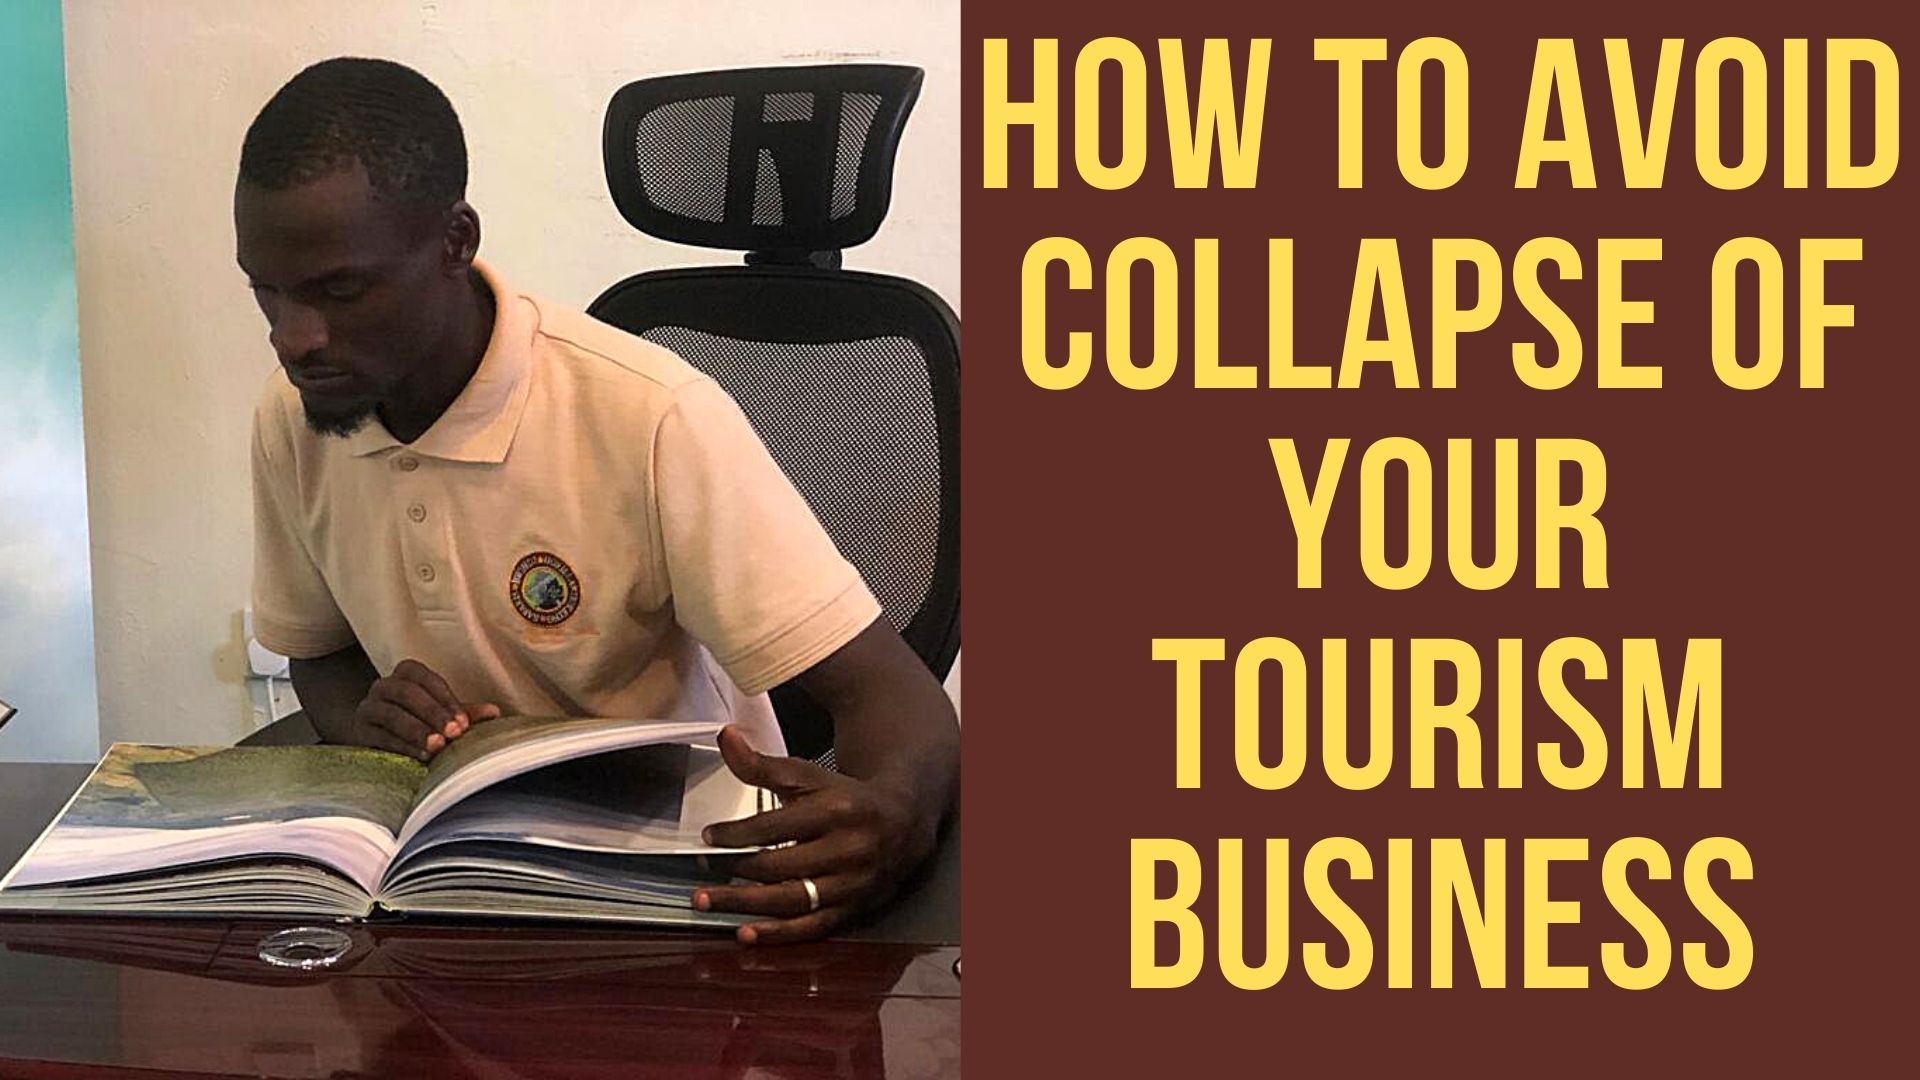 Tourism Business From Collapse